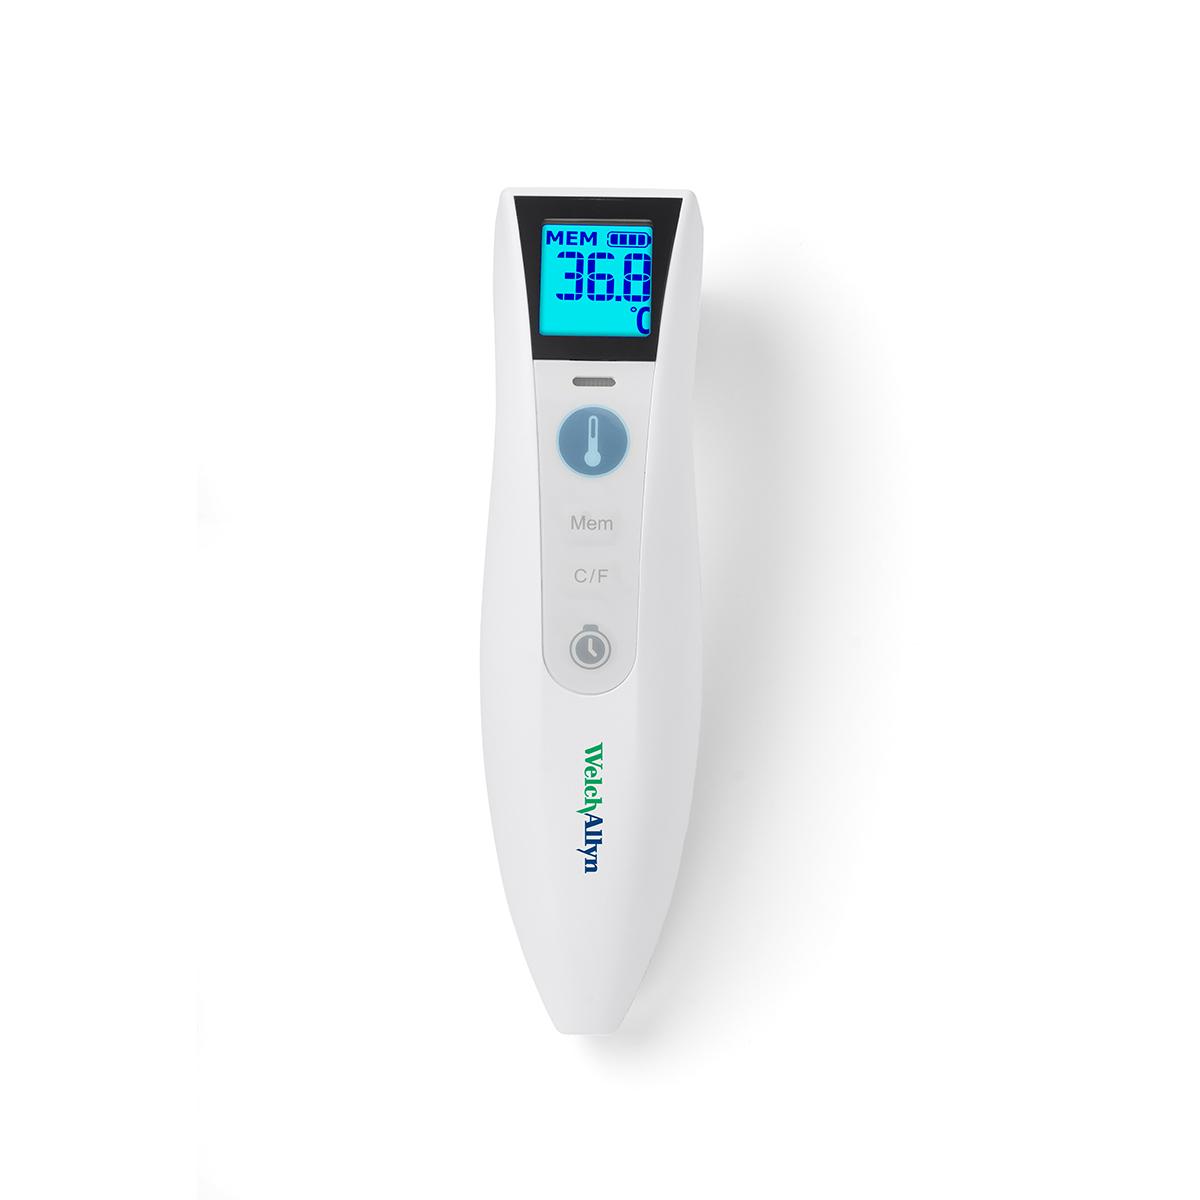 The Welch Allyn CareTemp Touch Free Thermometer is white, with a bright blue digital read-out screen